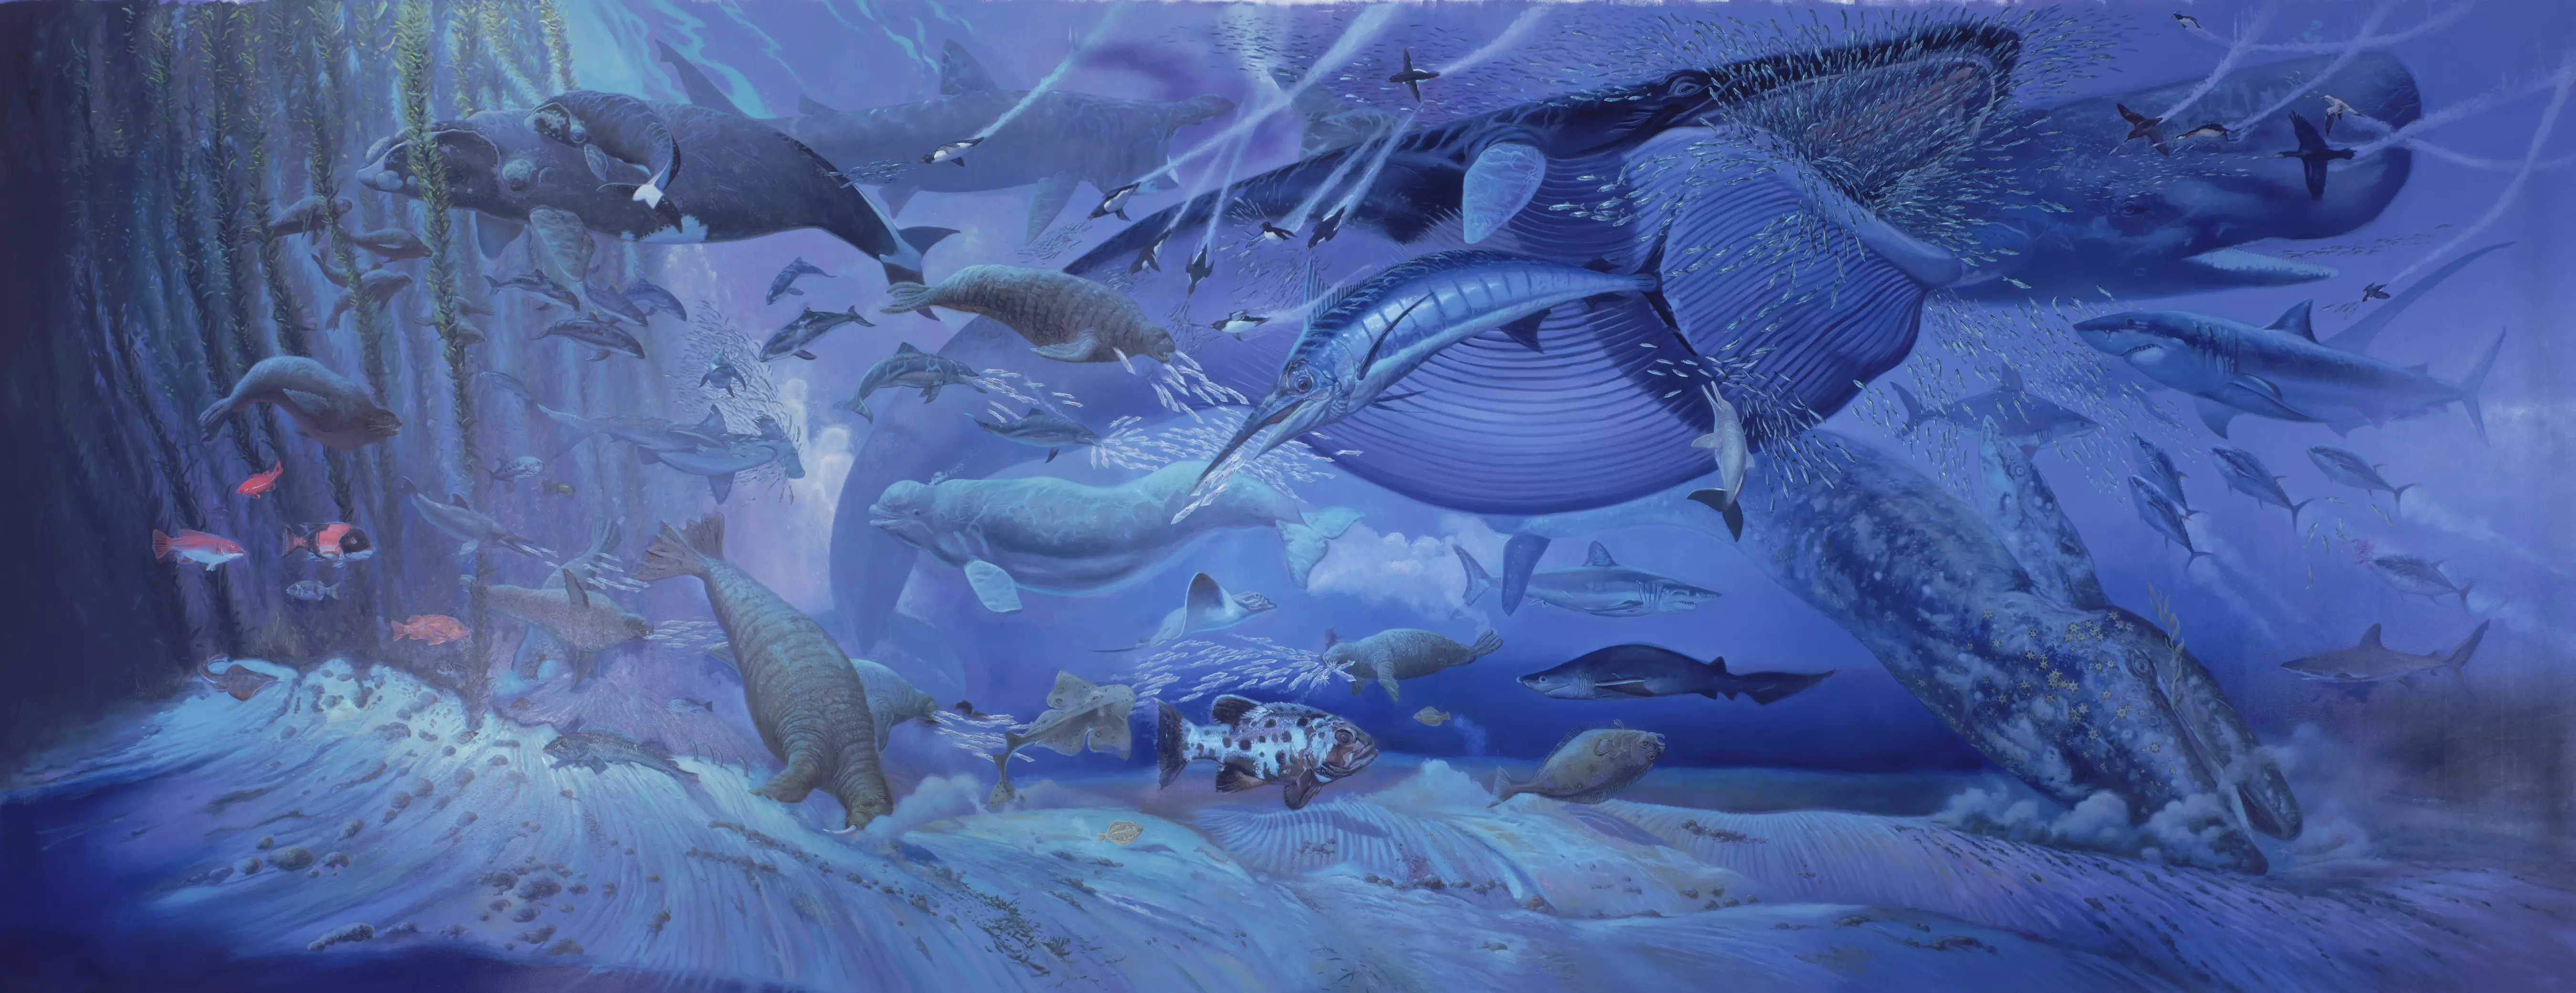 All Creatures Great and Small: Quarter Scale painting (Pliocene Bay with Feeding Whales), William Stout